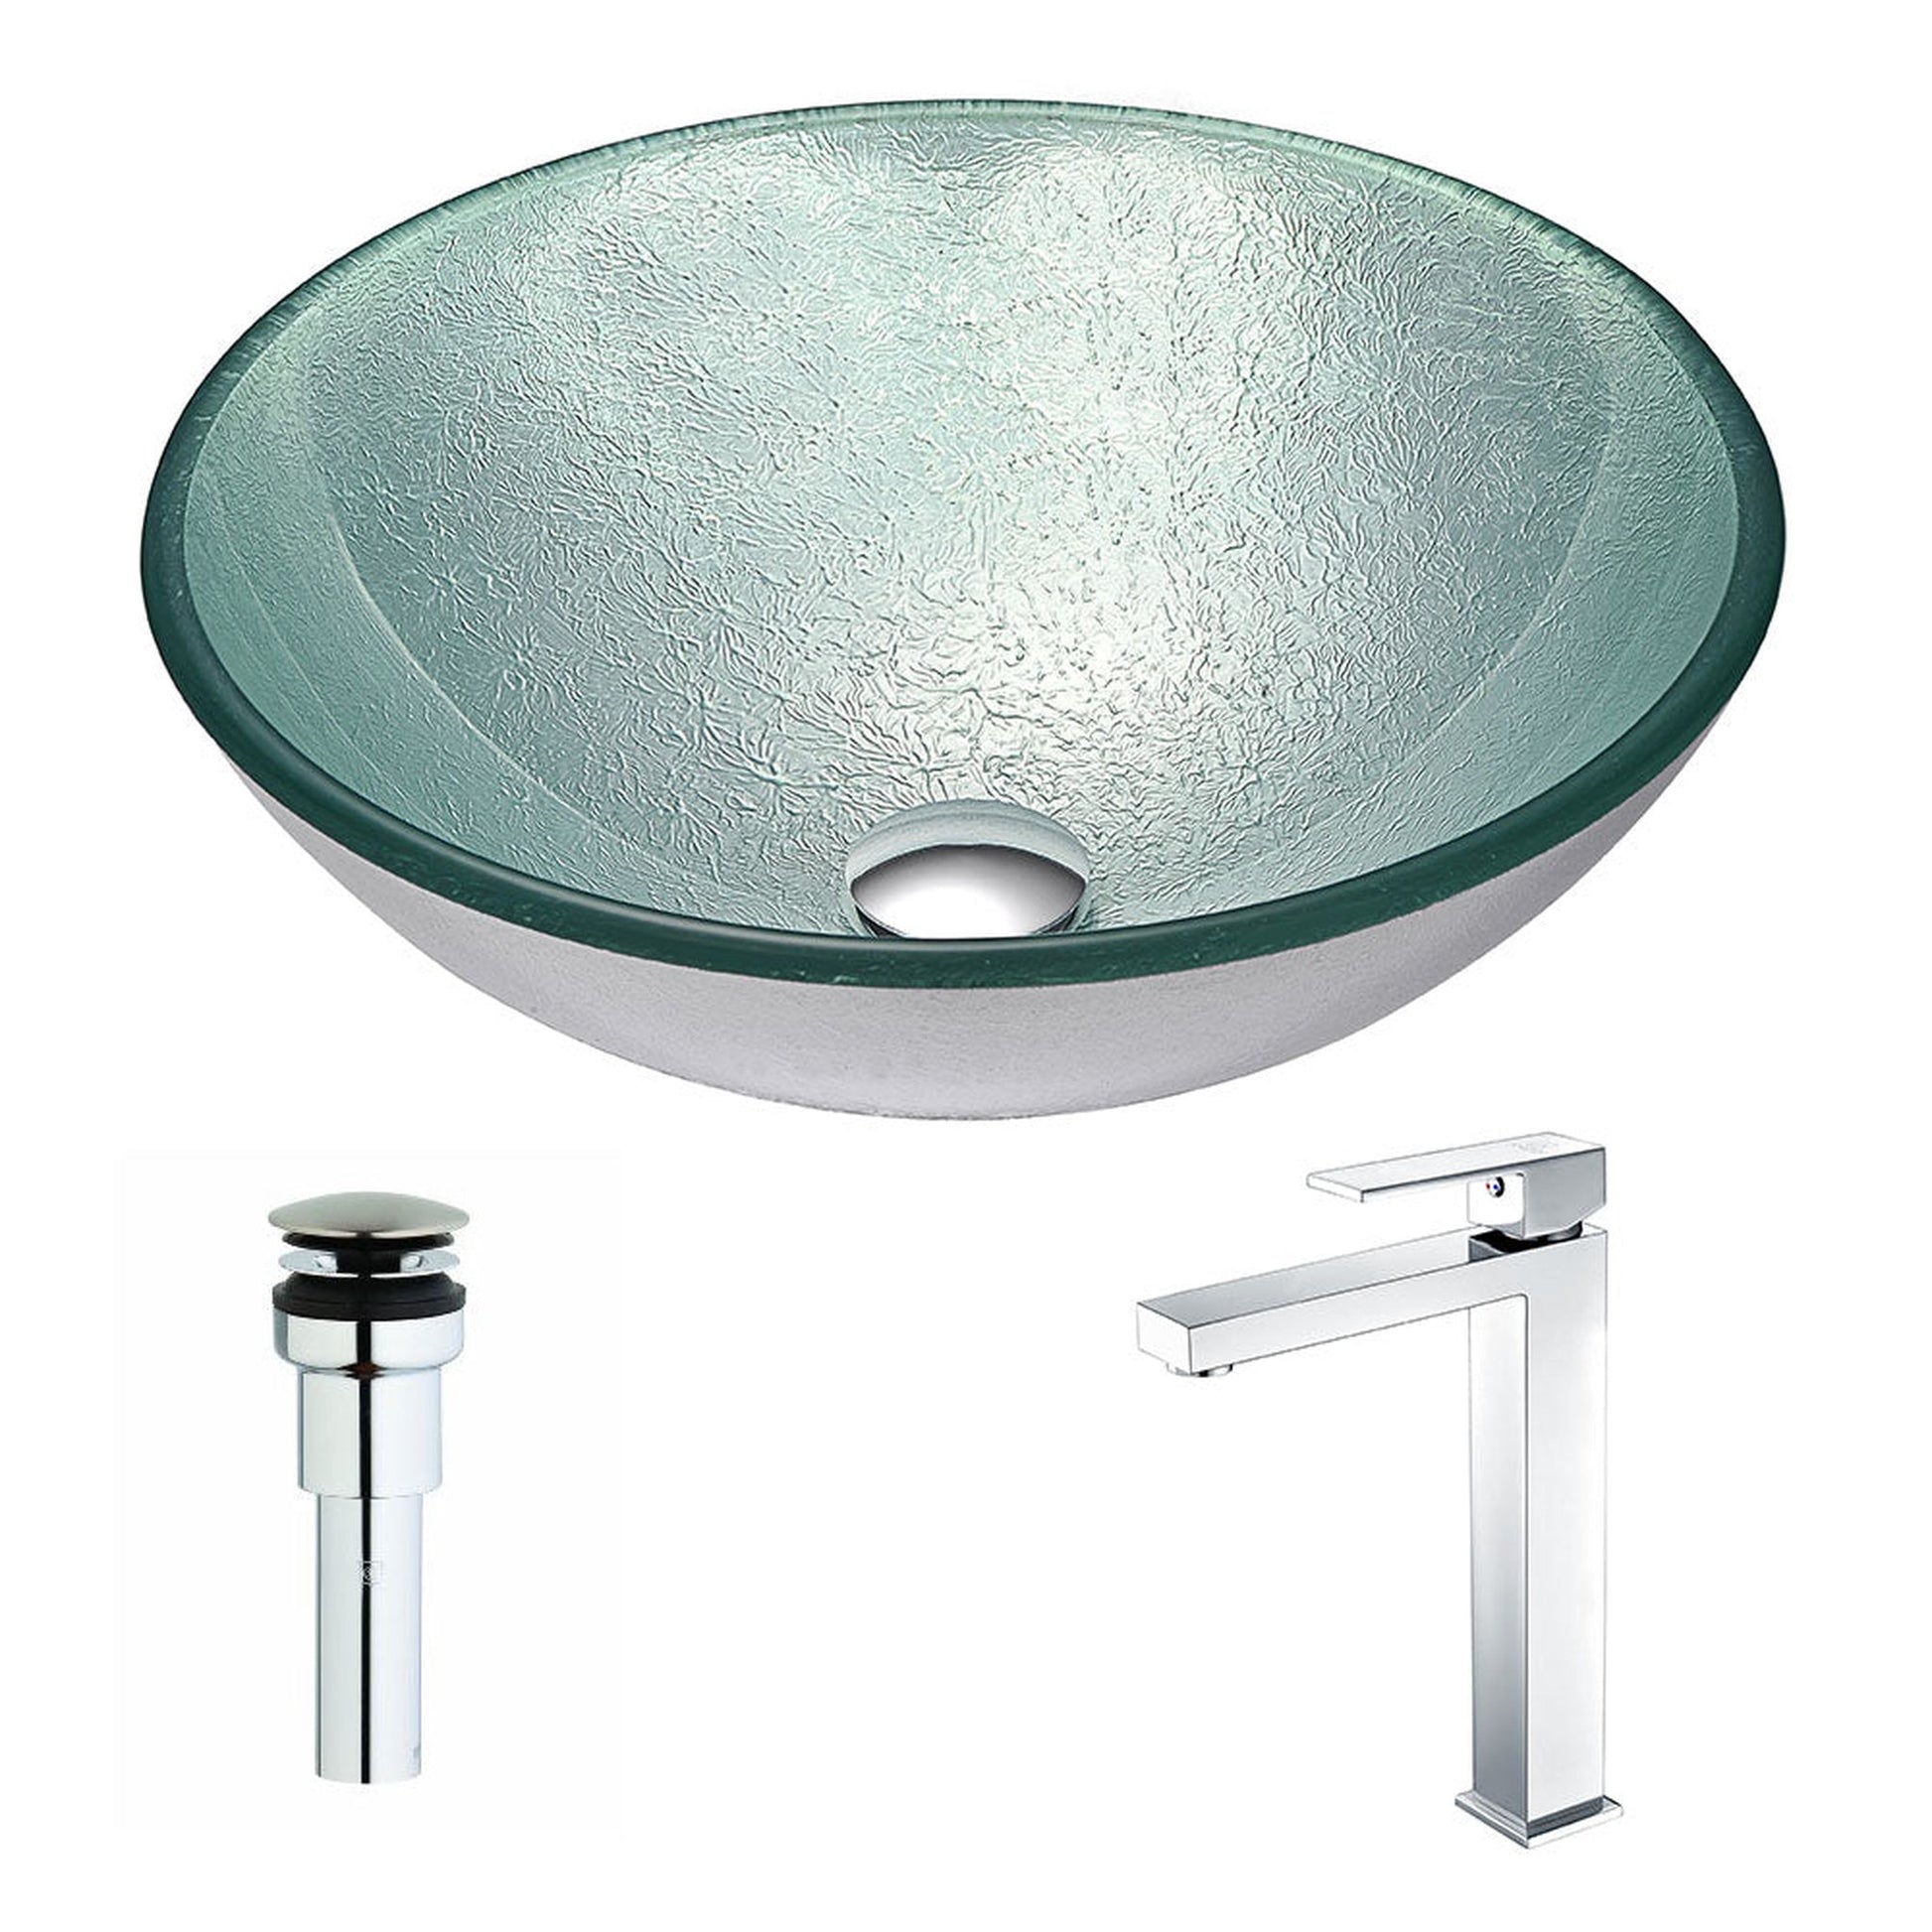 ANZZI Spirito Series 17" x 17" Round Churning Silver Deco-Glass Vessel Sink With Chrome Pop-Up Drain and Enti Faucet